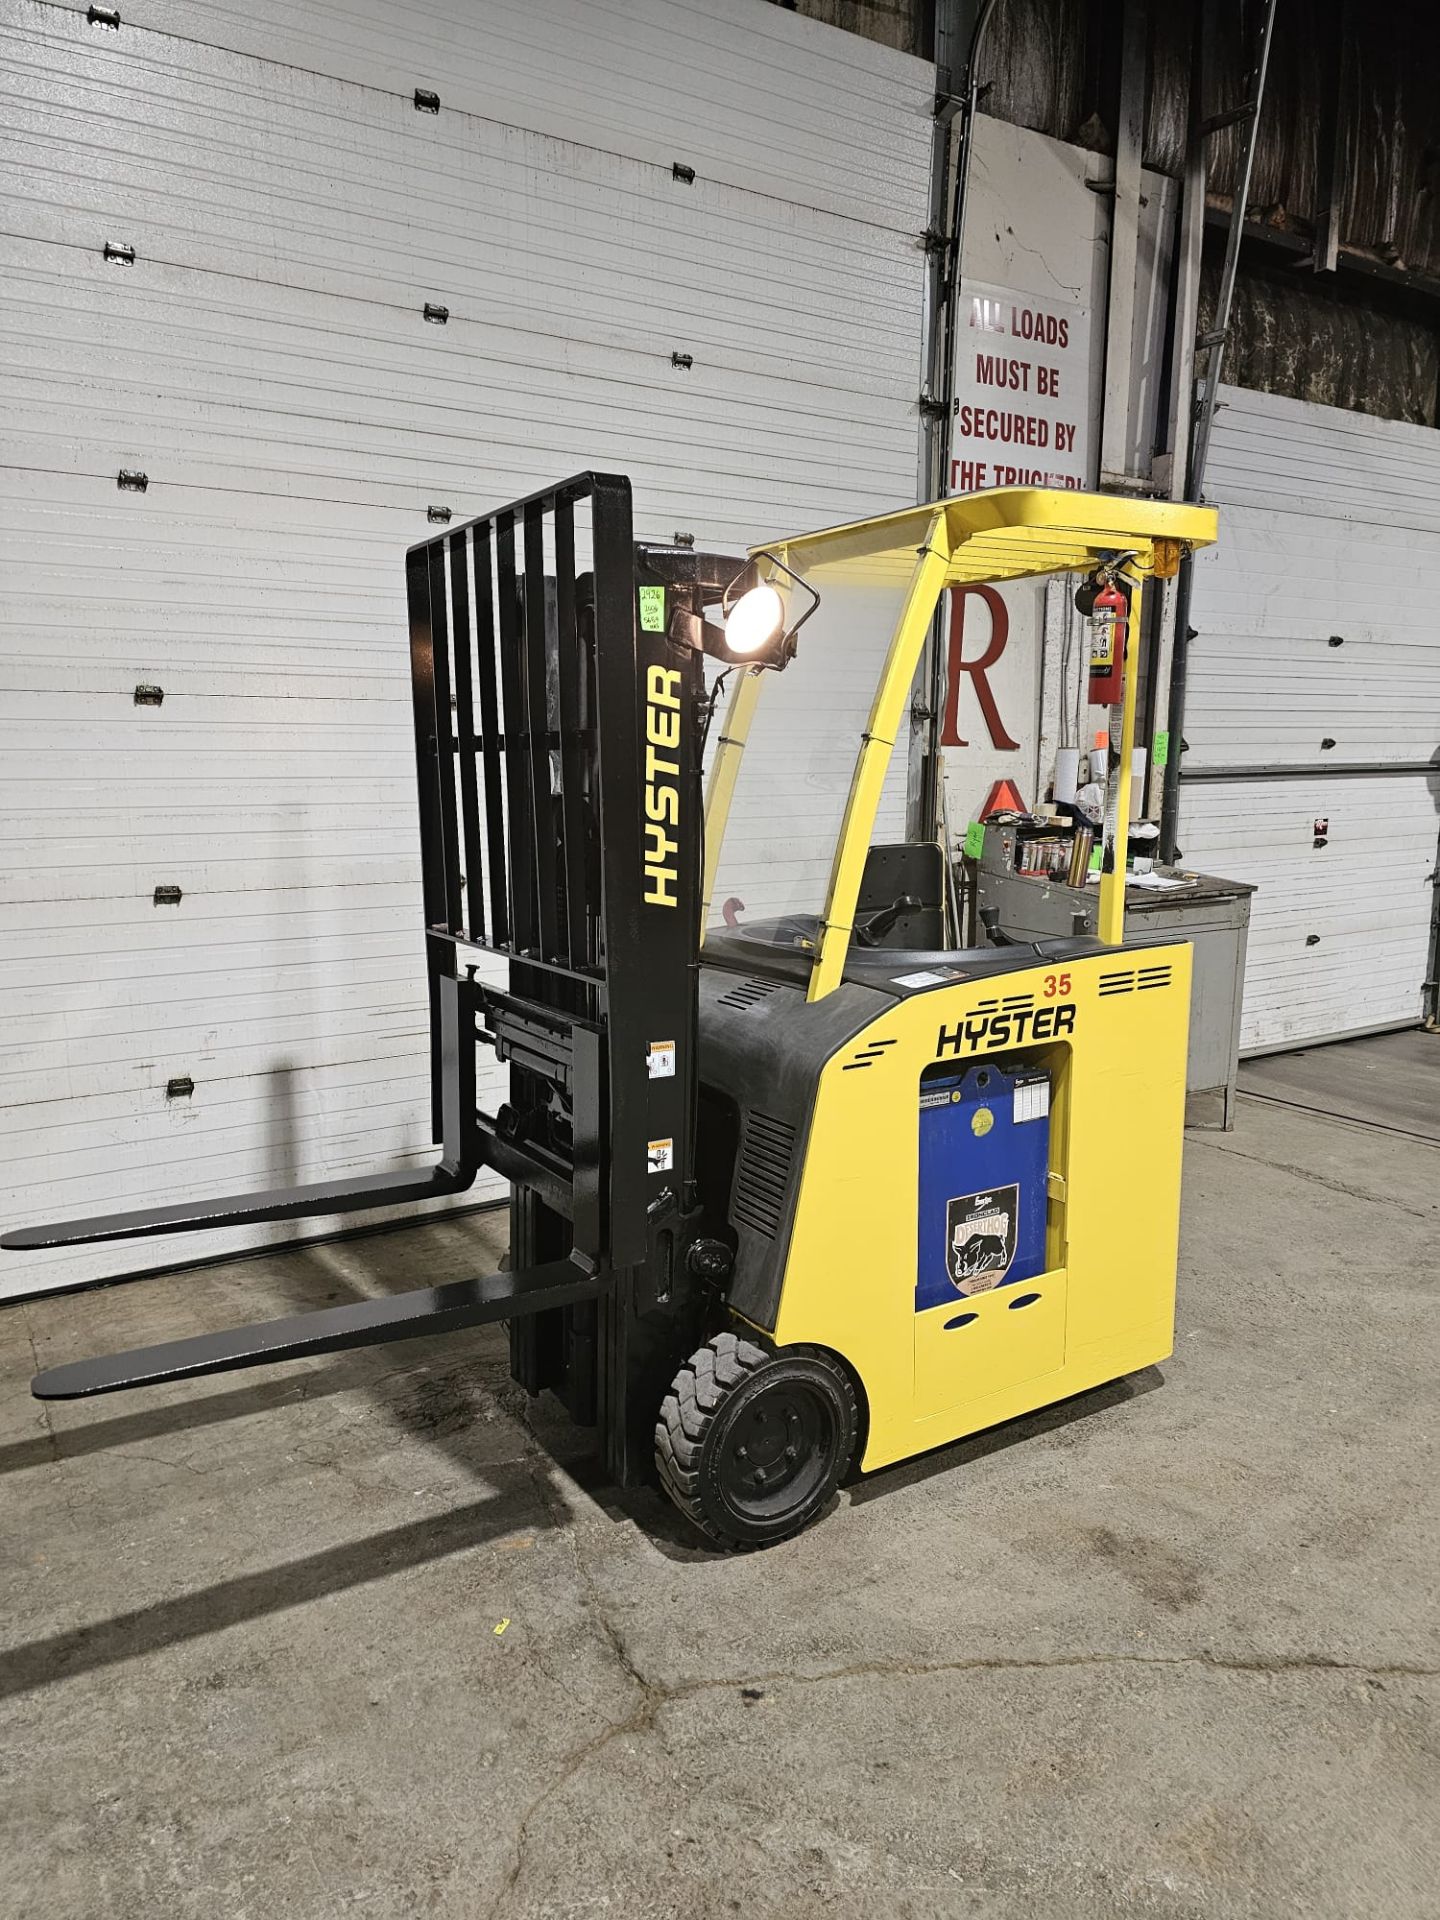 2006 Hyster 3,500lbs Capacity Electric Stand On Forklift 3-STAGE MAST 36V with sideshift & Tires - Image 2 of 8